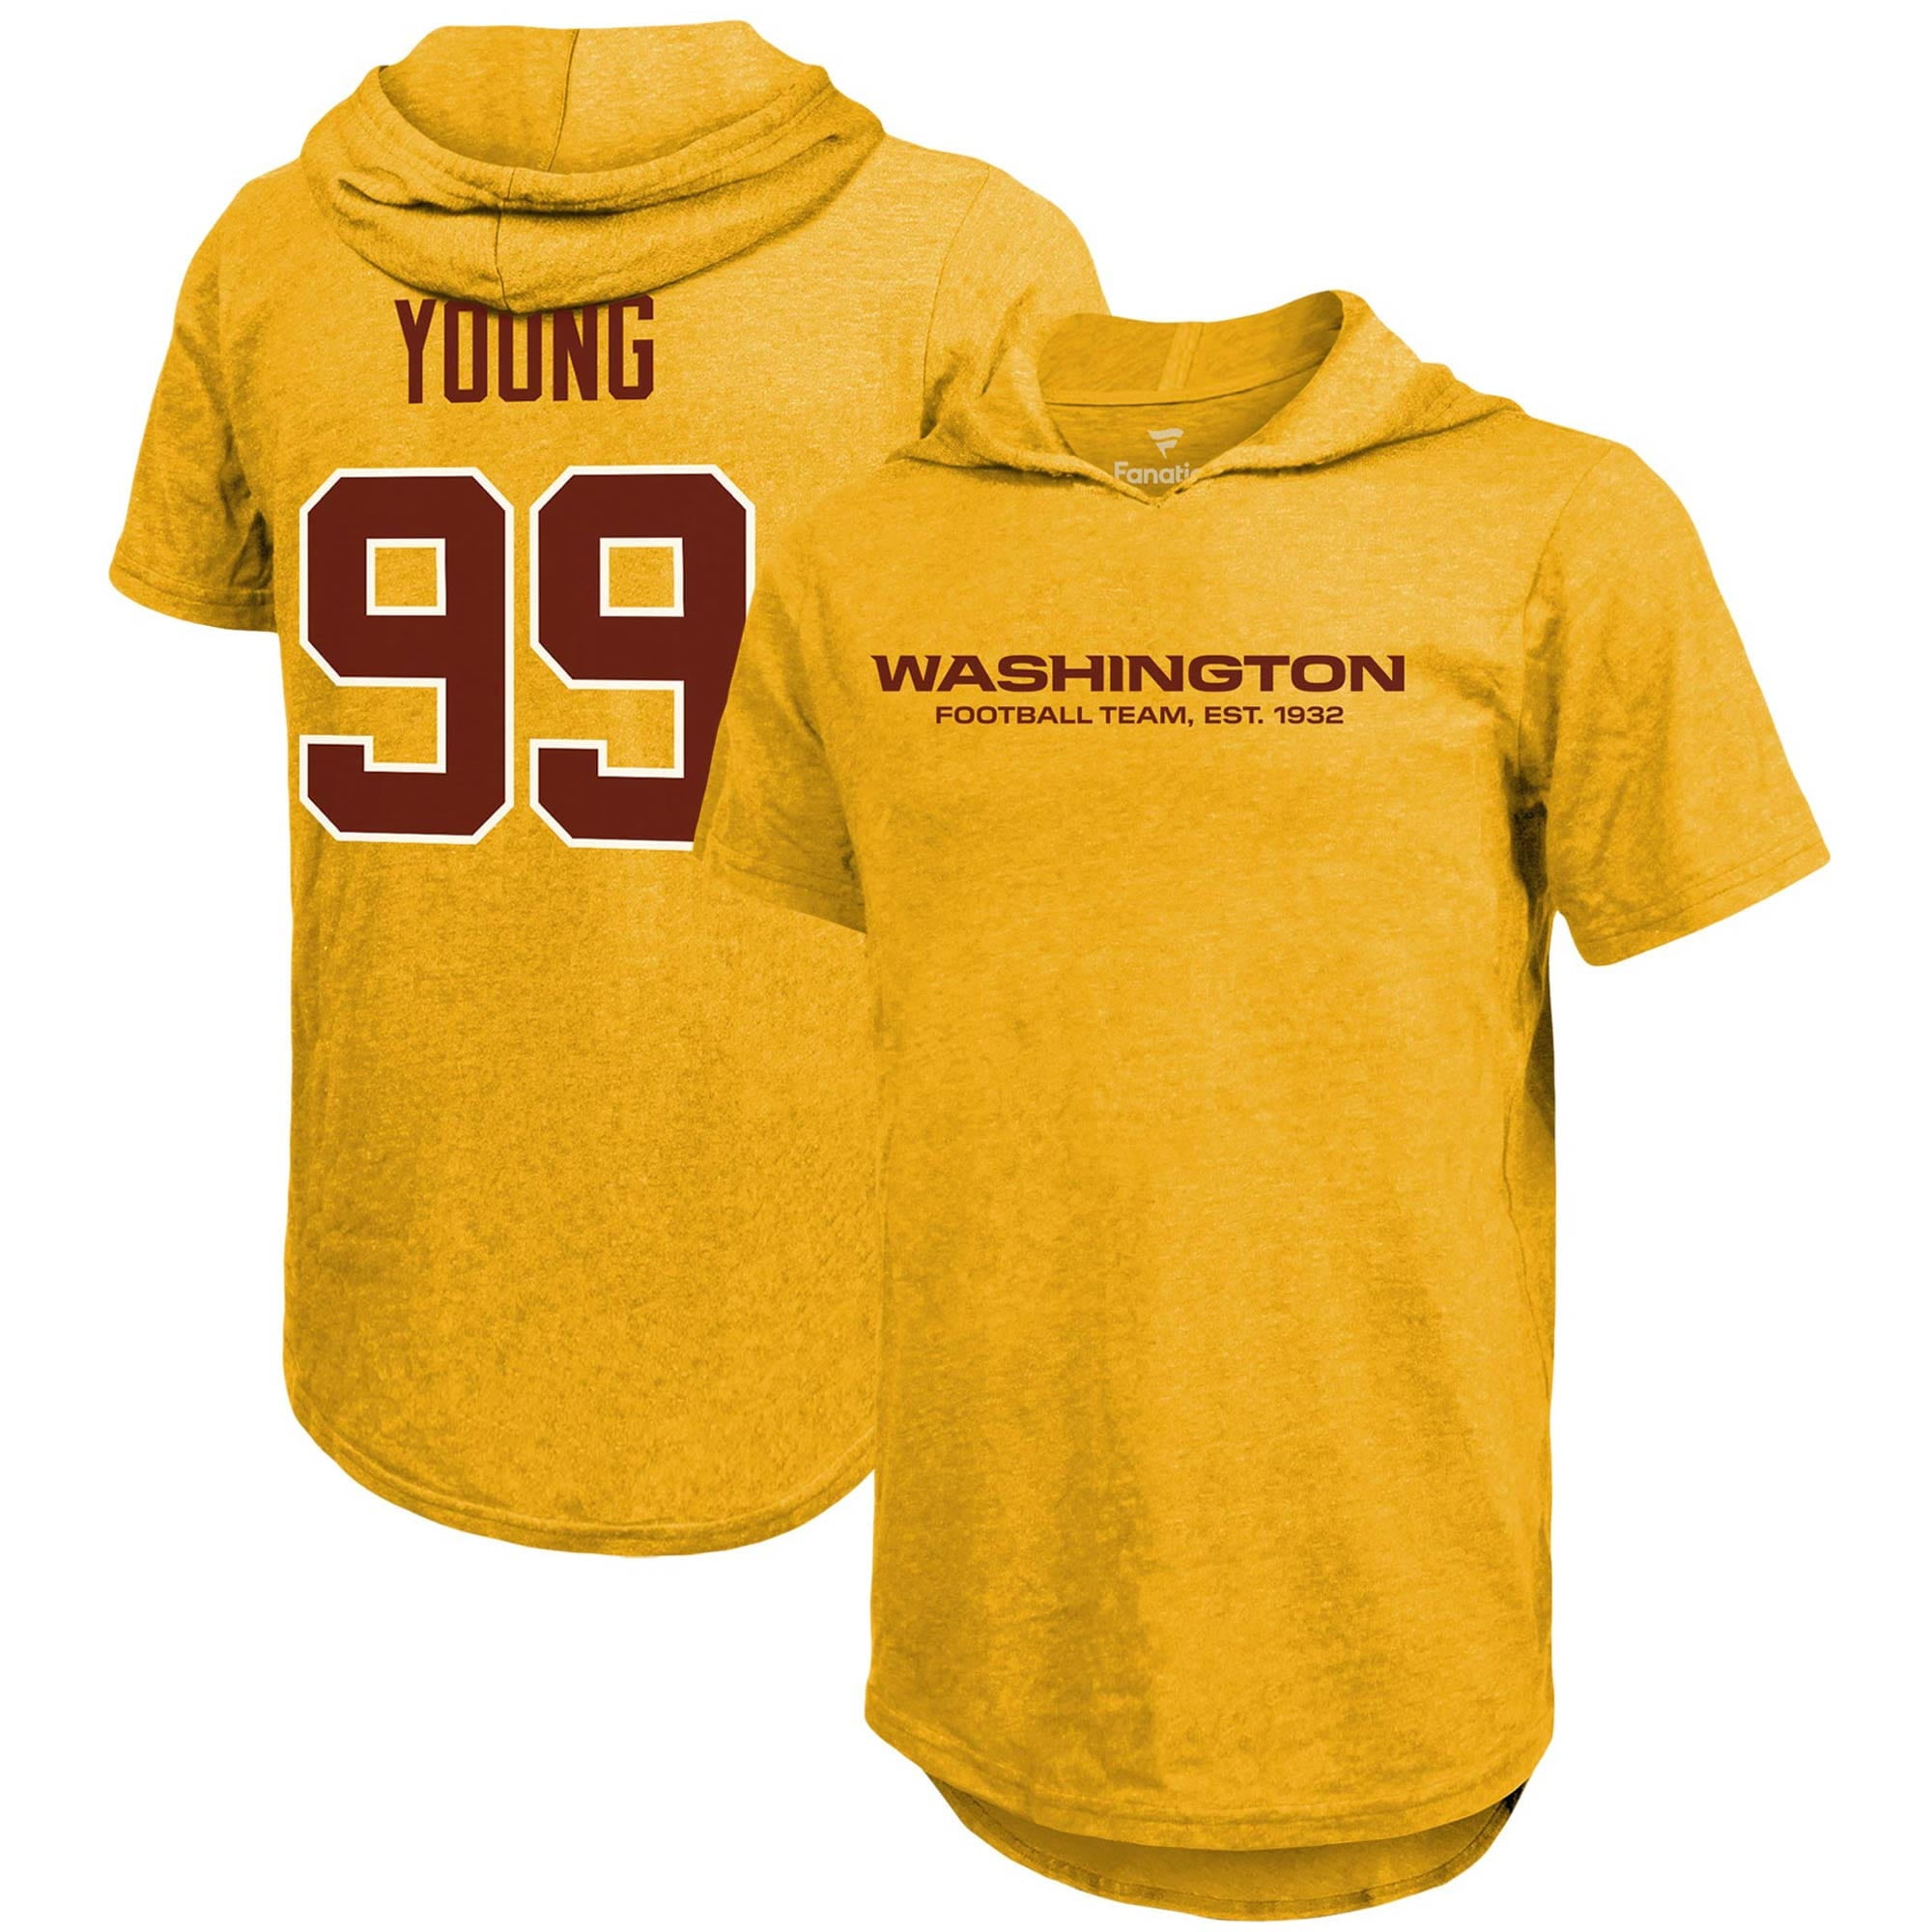 chase young jersey shirt